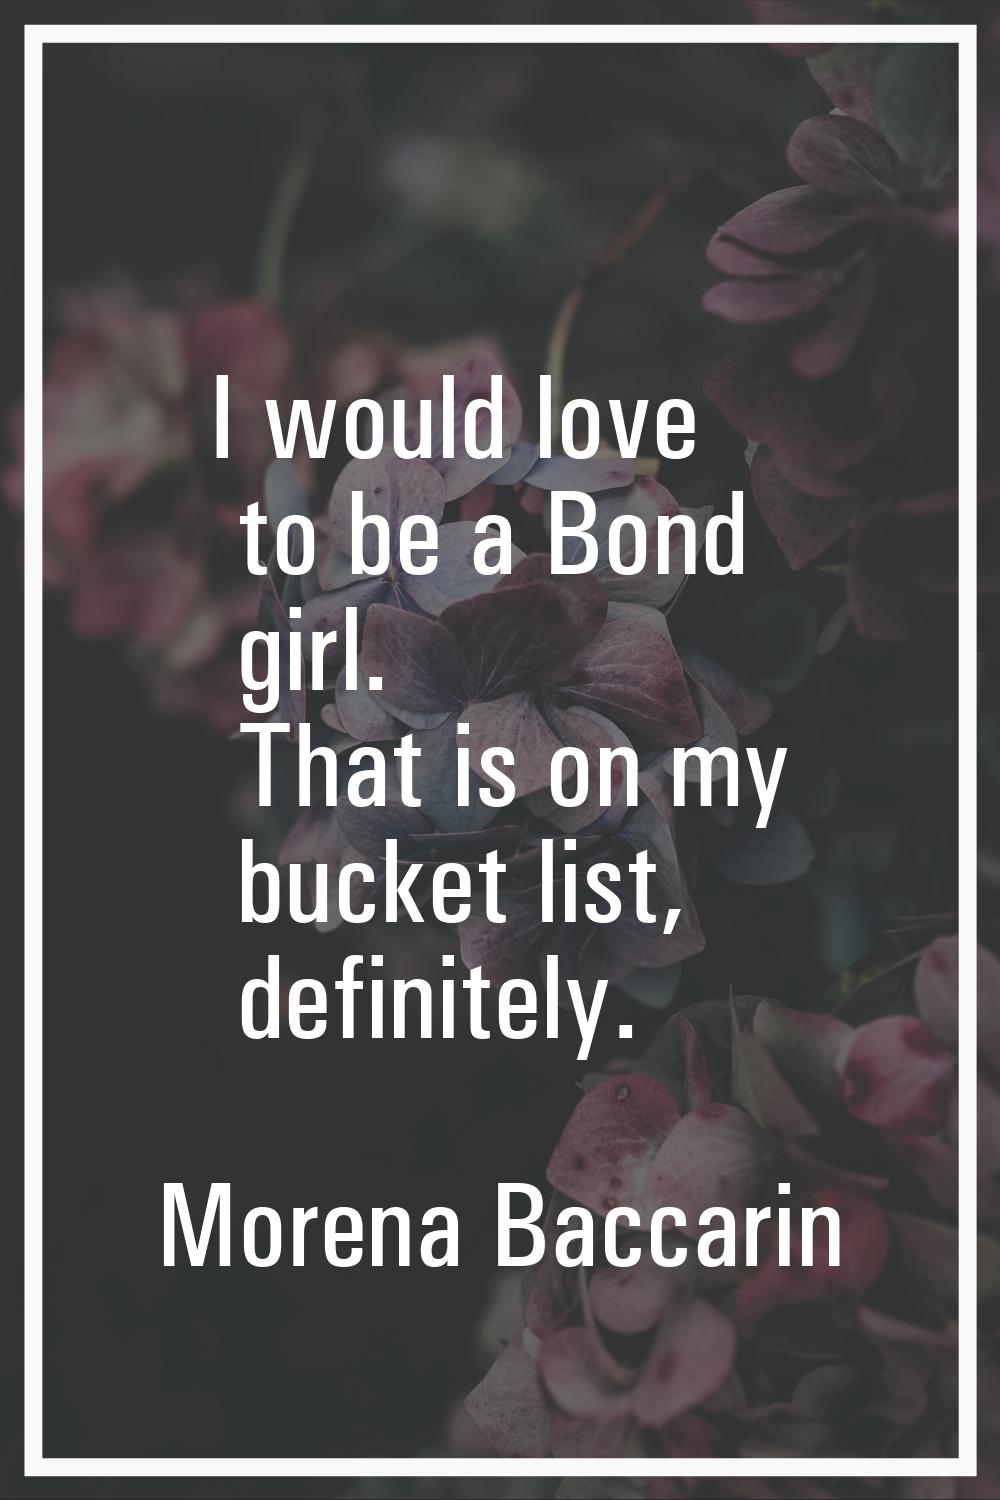 I would love to be a Bond girl. That is on my bucket list, definitely.